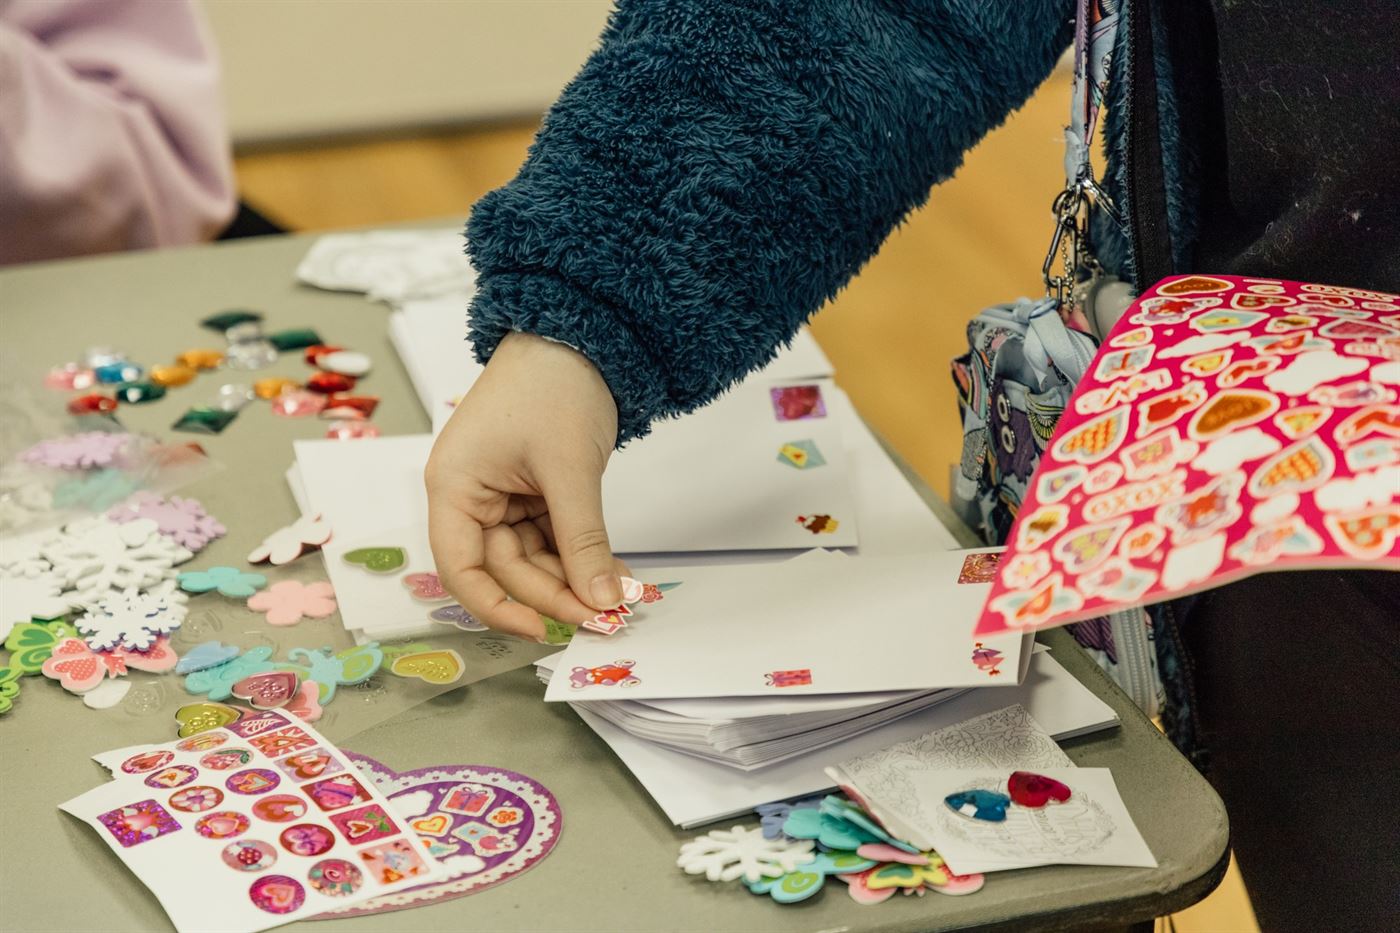 Students also had the opportunity to make Valentine's Day cards. Karsten Englander | The Montclarion